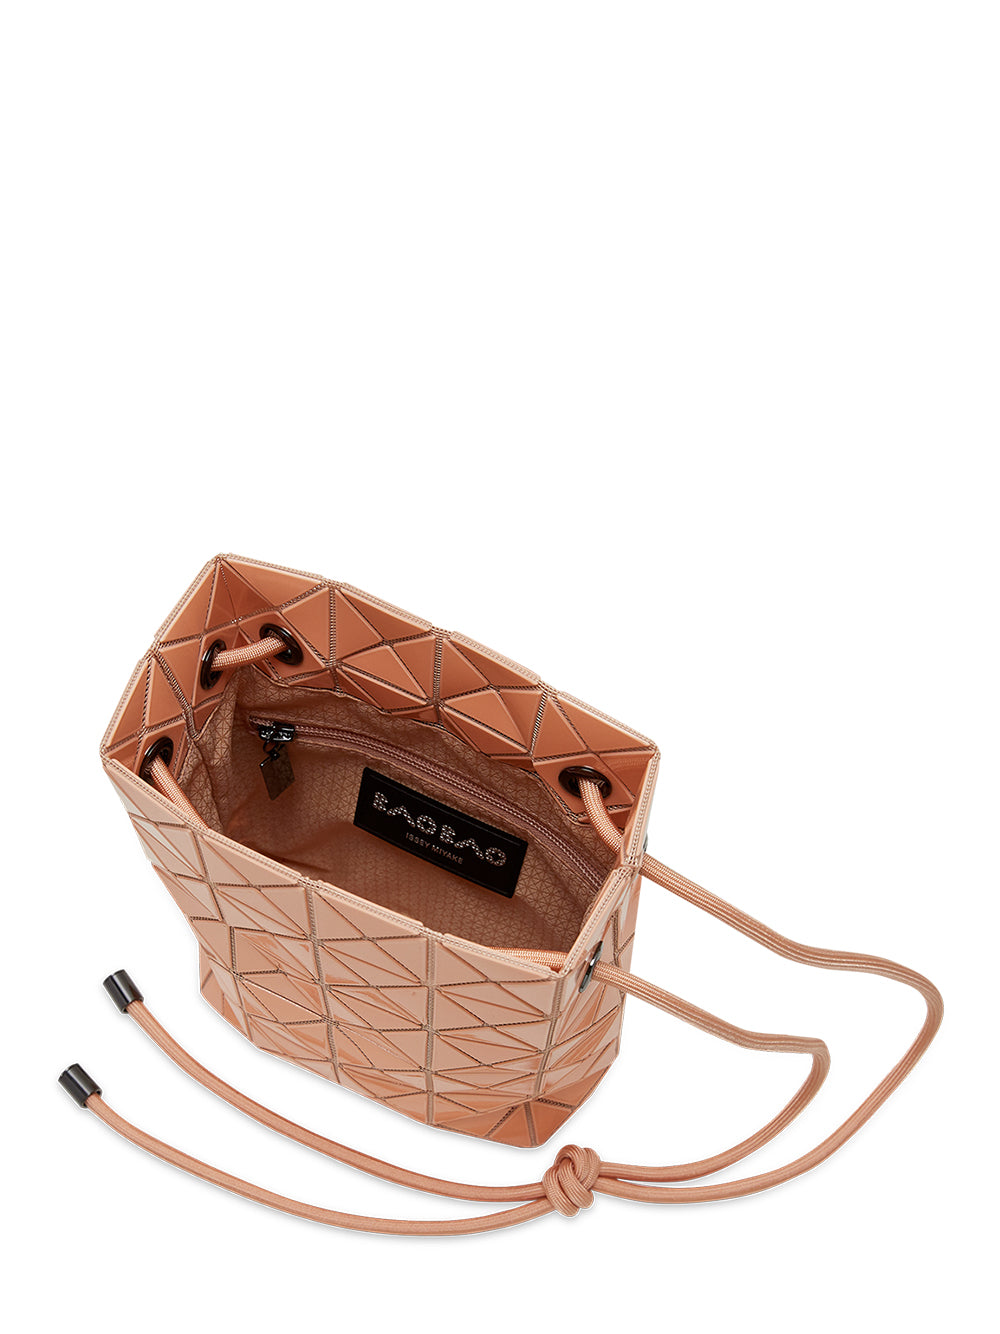 WRING ONE-TONE Shoulder Bag (Small) (Apricot)